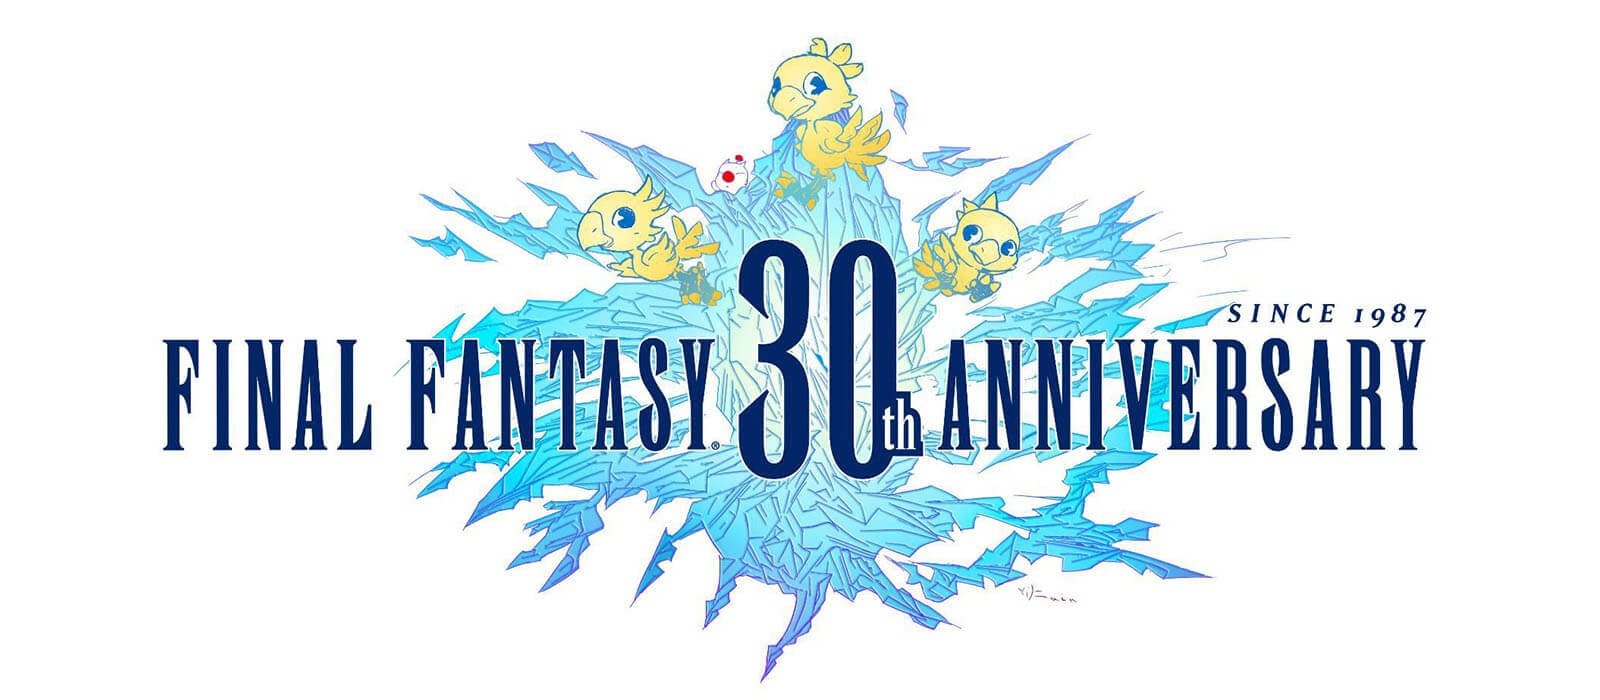 Final Fantasy 30th Anniversary Concert - Here are the opportunities to see some of your favorite bands performing live in 2017 Upcoming JPOP/JRock Concerts in America (non-US) & Oceania